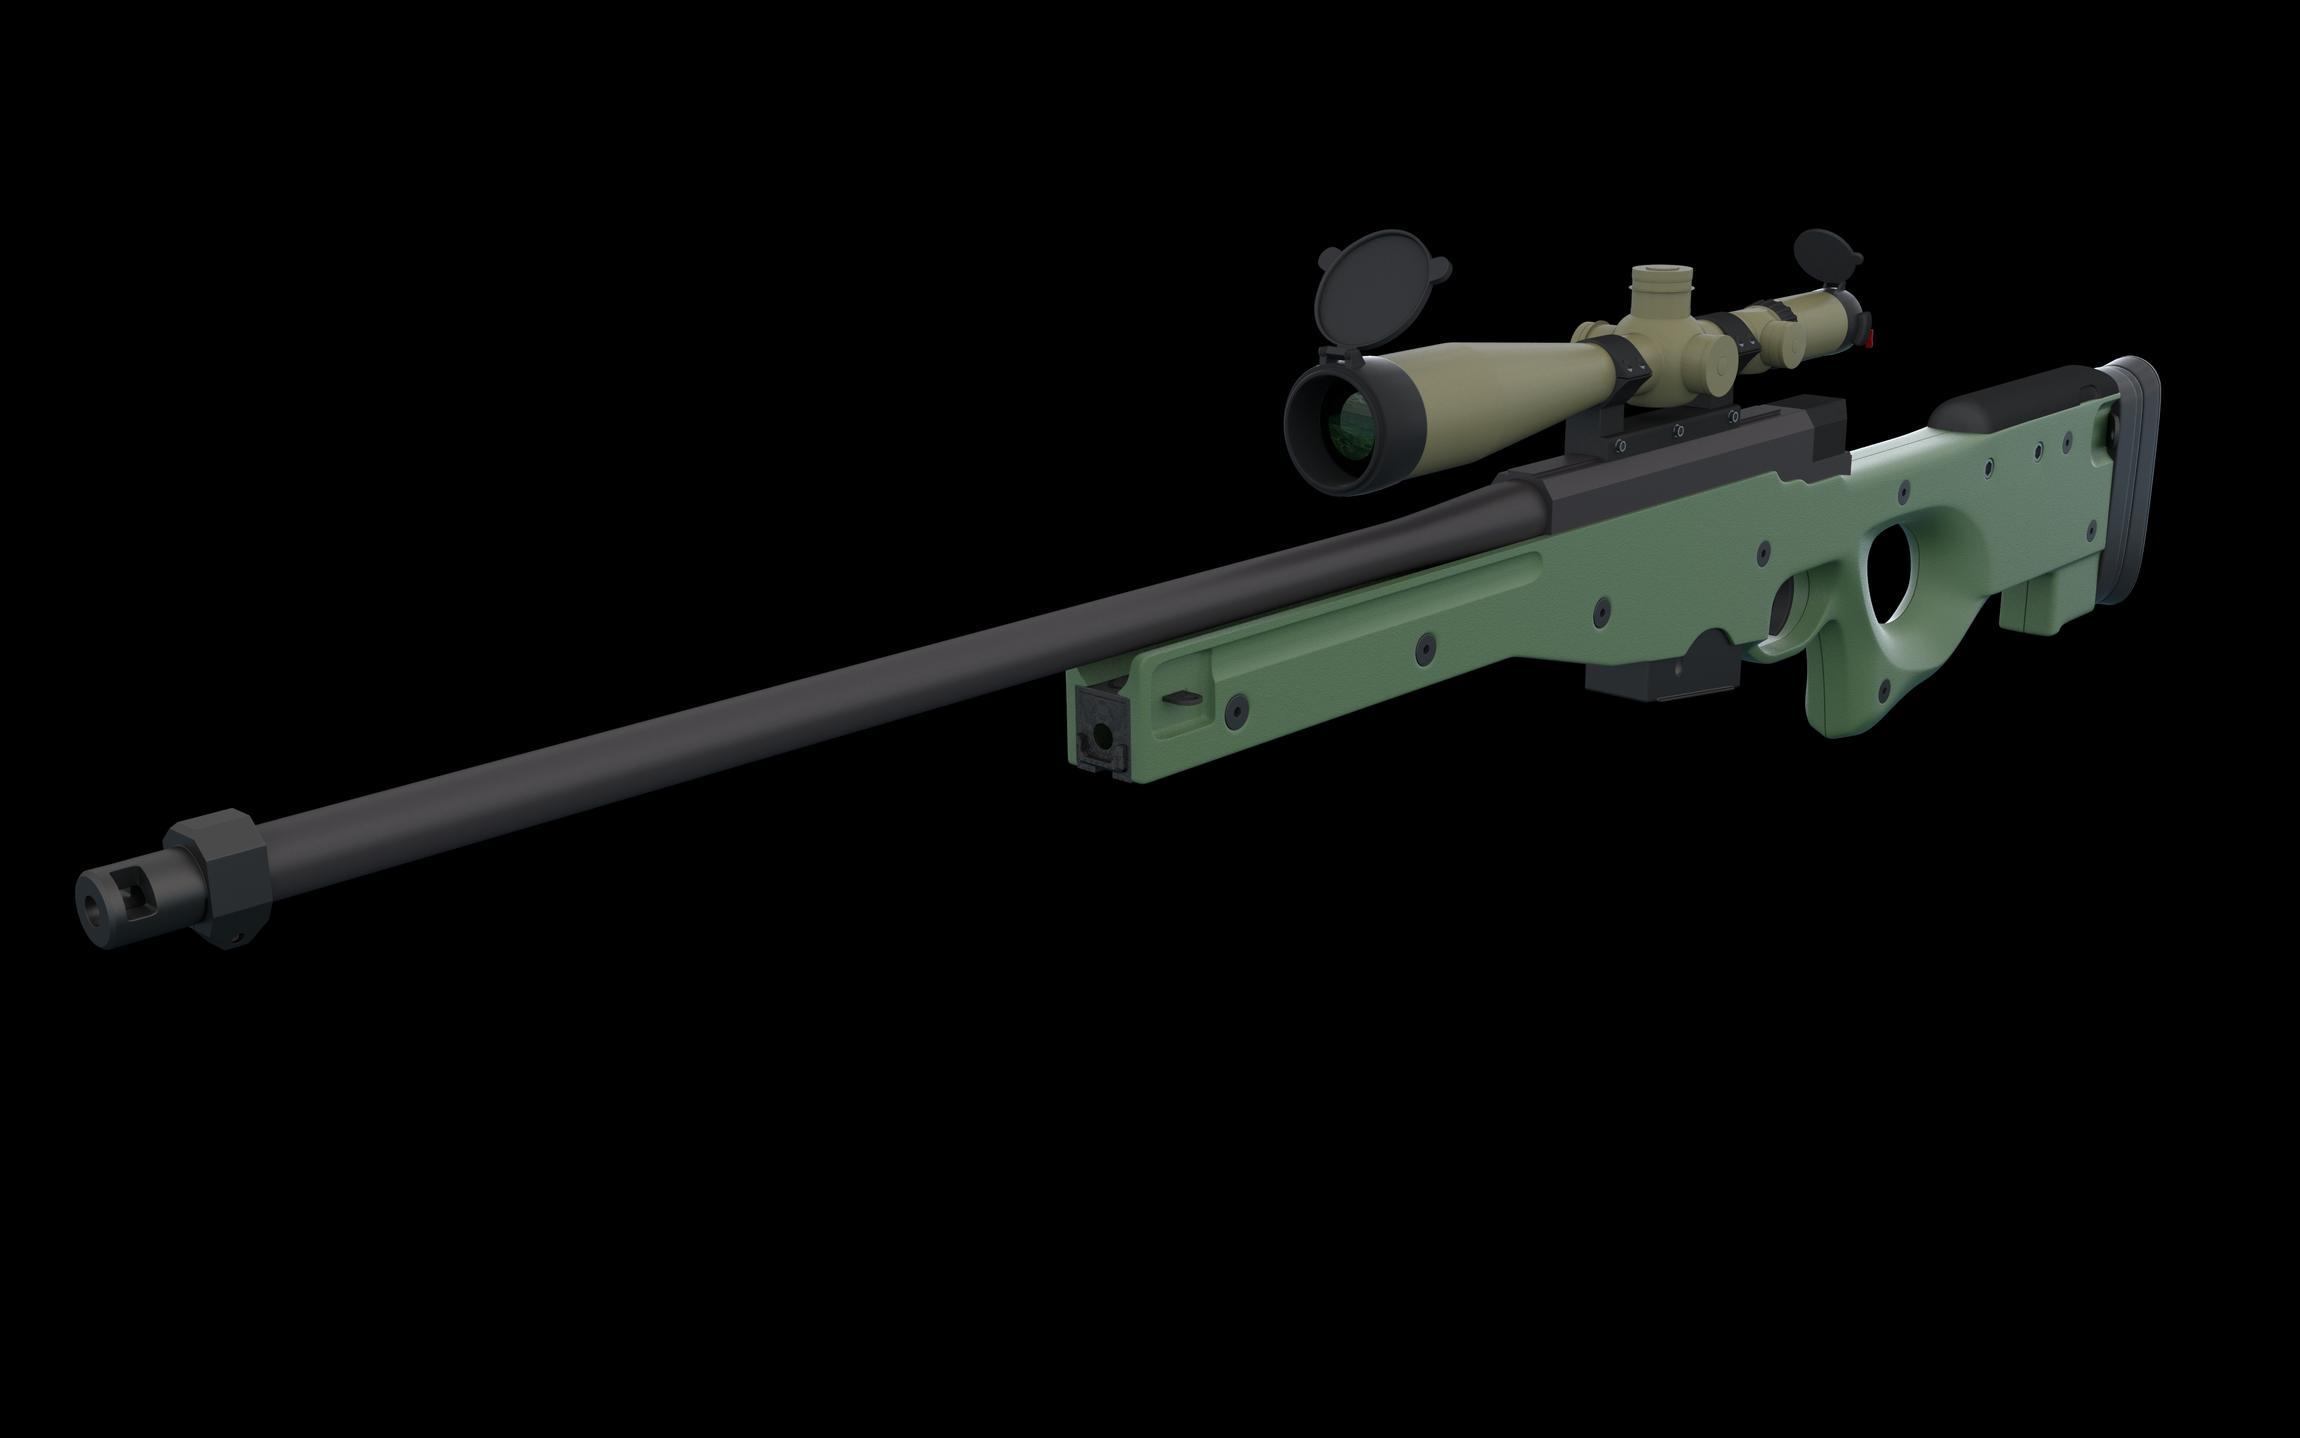 Awp cannons карта мастерская фото 55